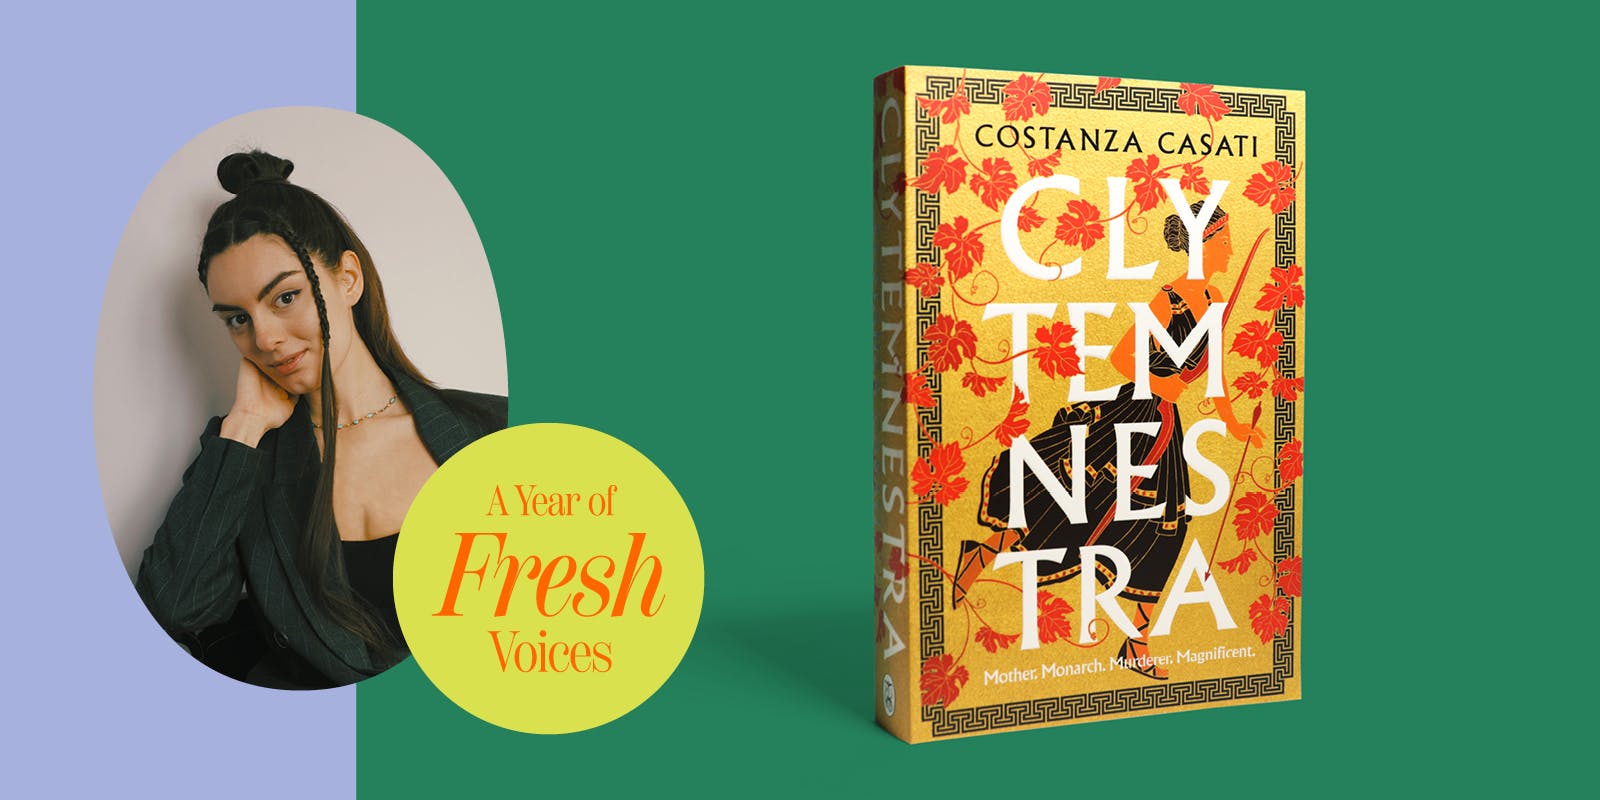 Costanza Casati, debut author, shares the one piece of advice she could give her past self.